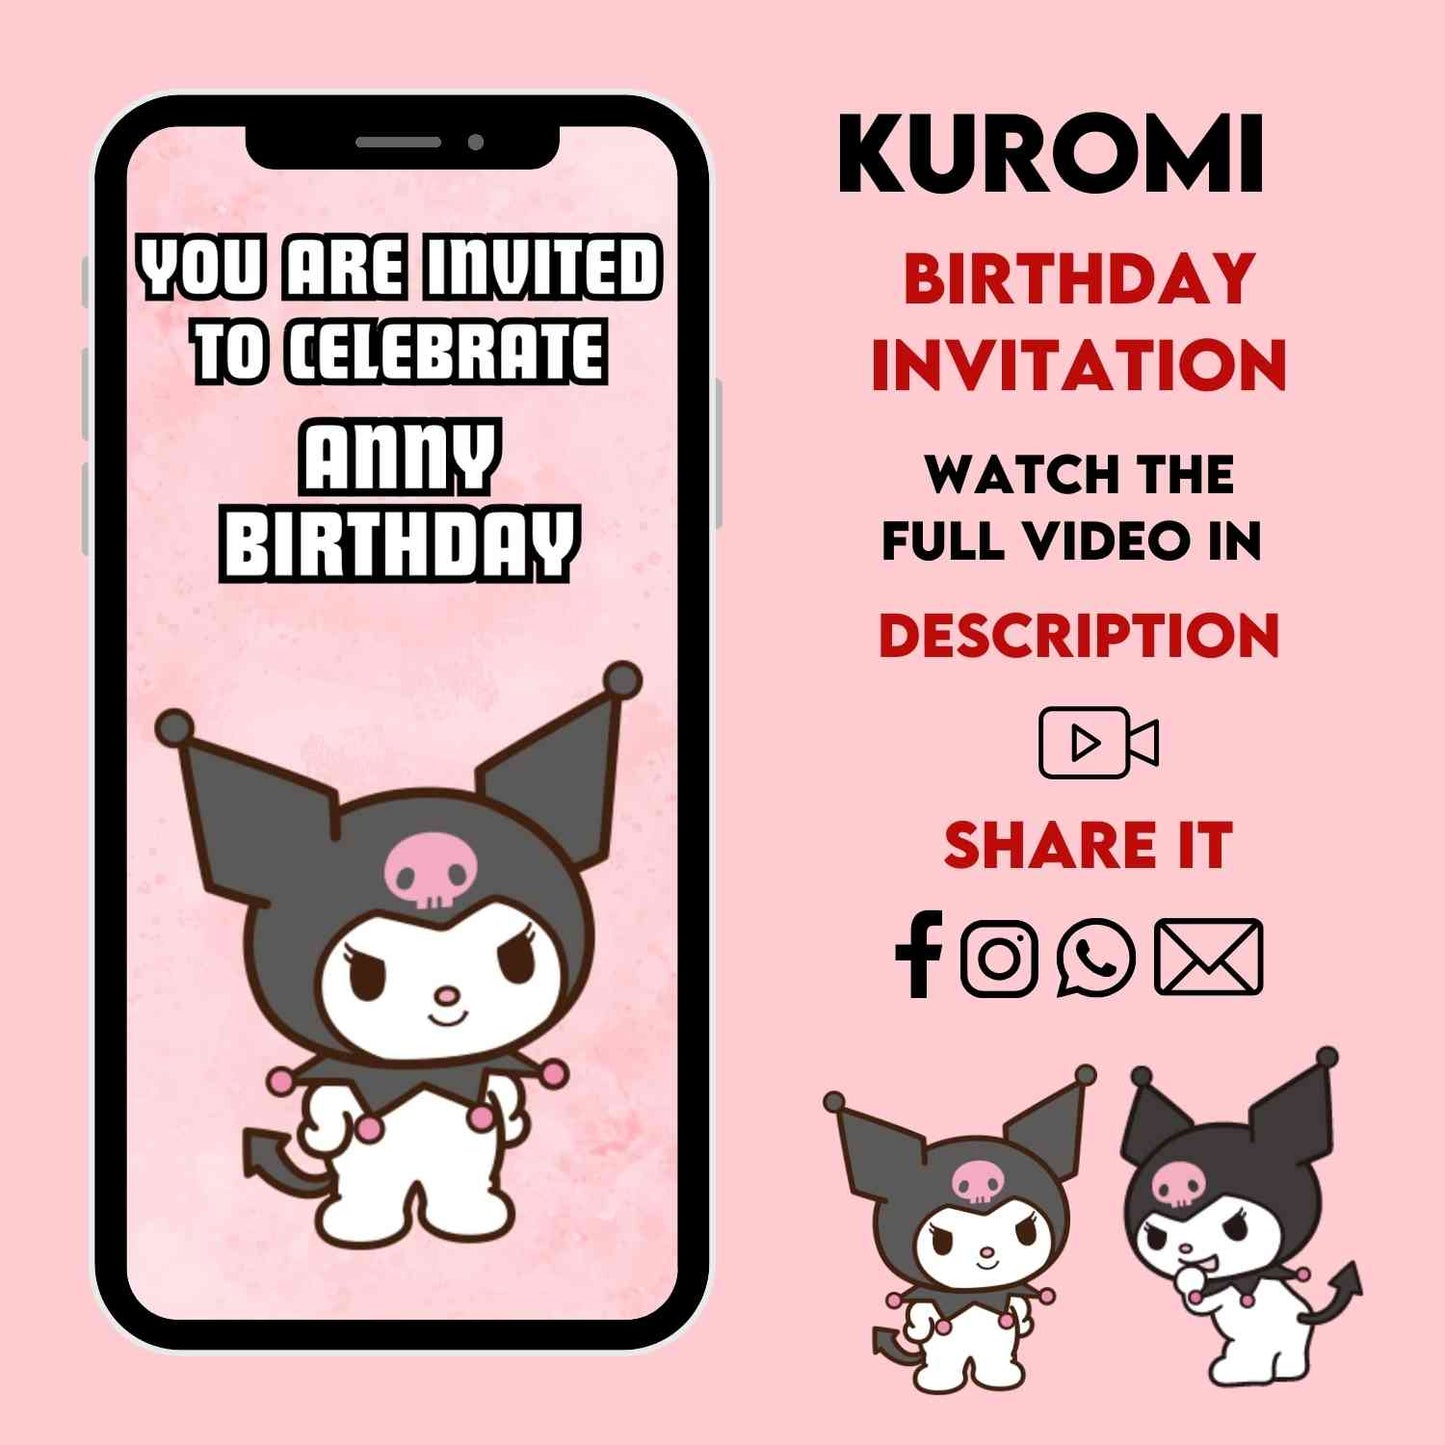 Kuromi Birthday Animated Video Invitation - Cute and Trendy Designs for a Memorable Celebration